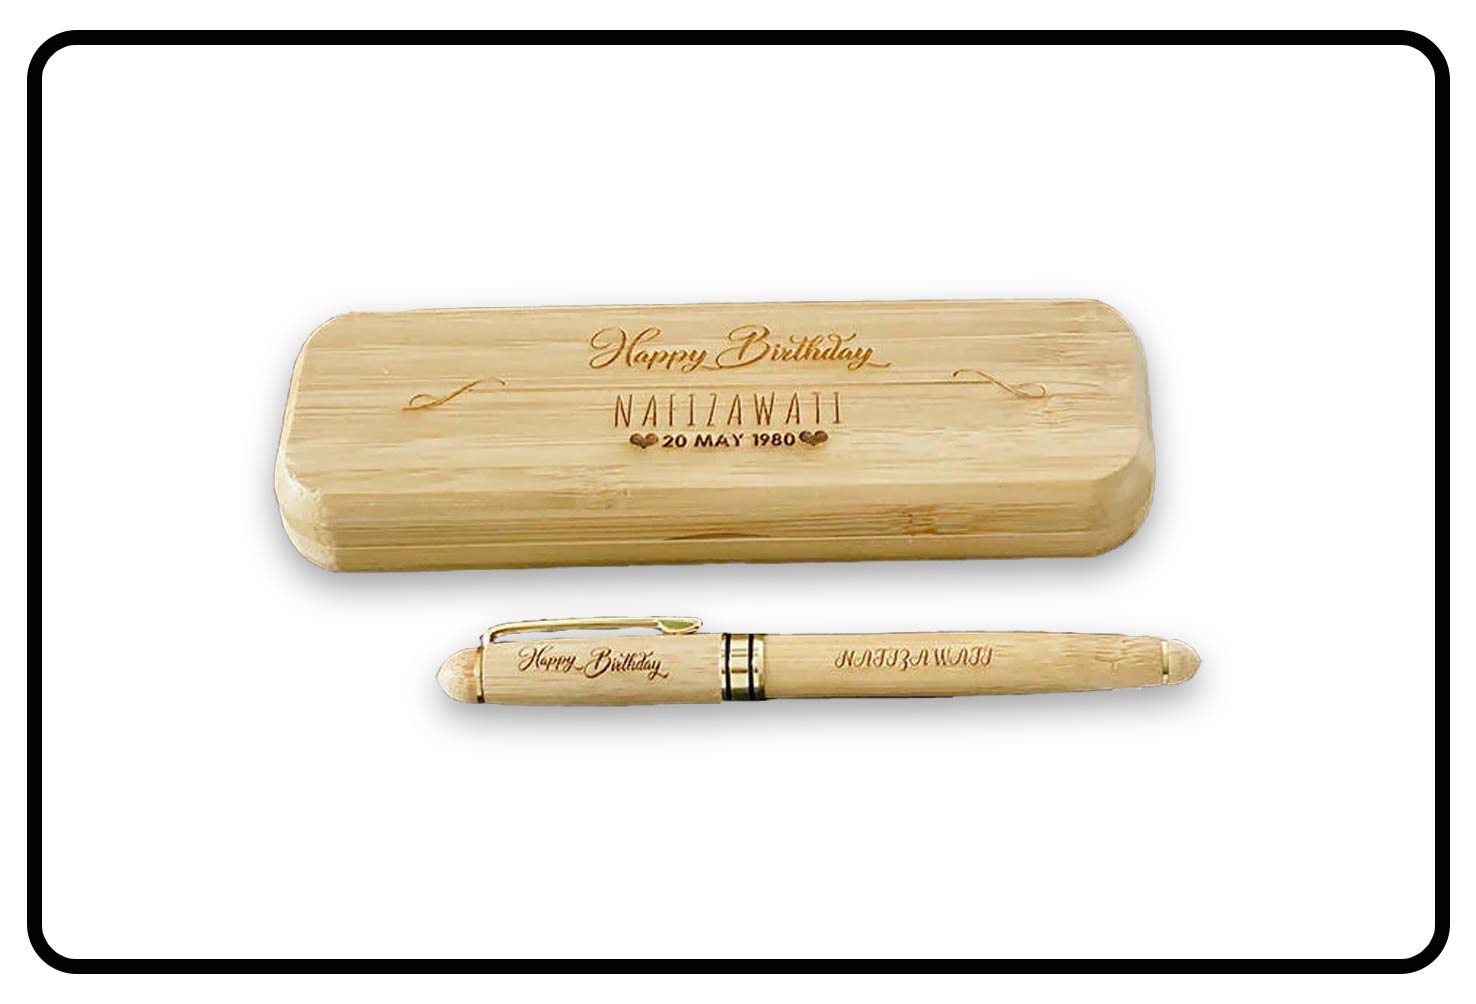 Pen and Box Engraving